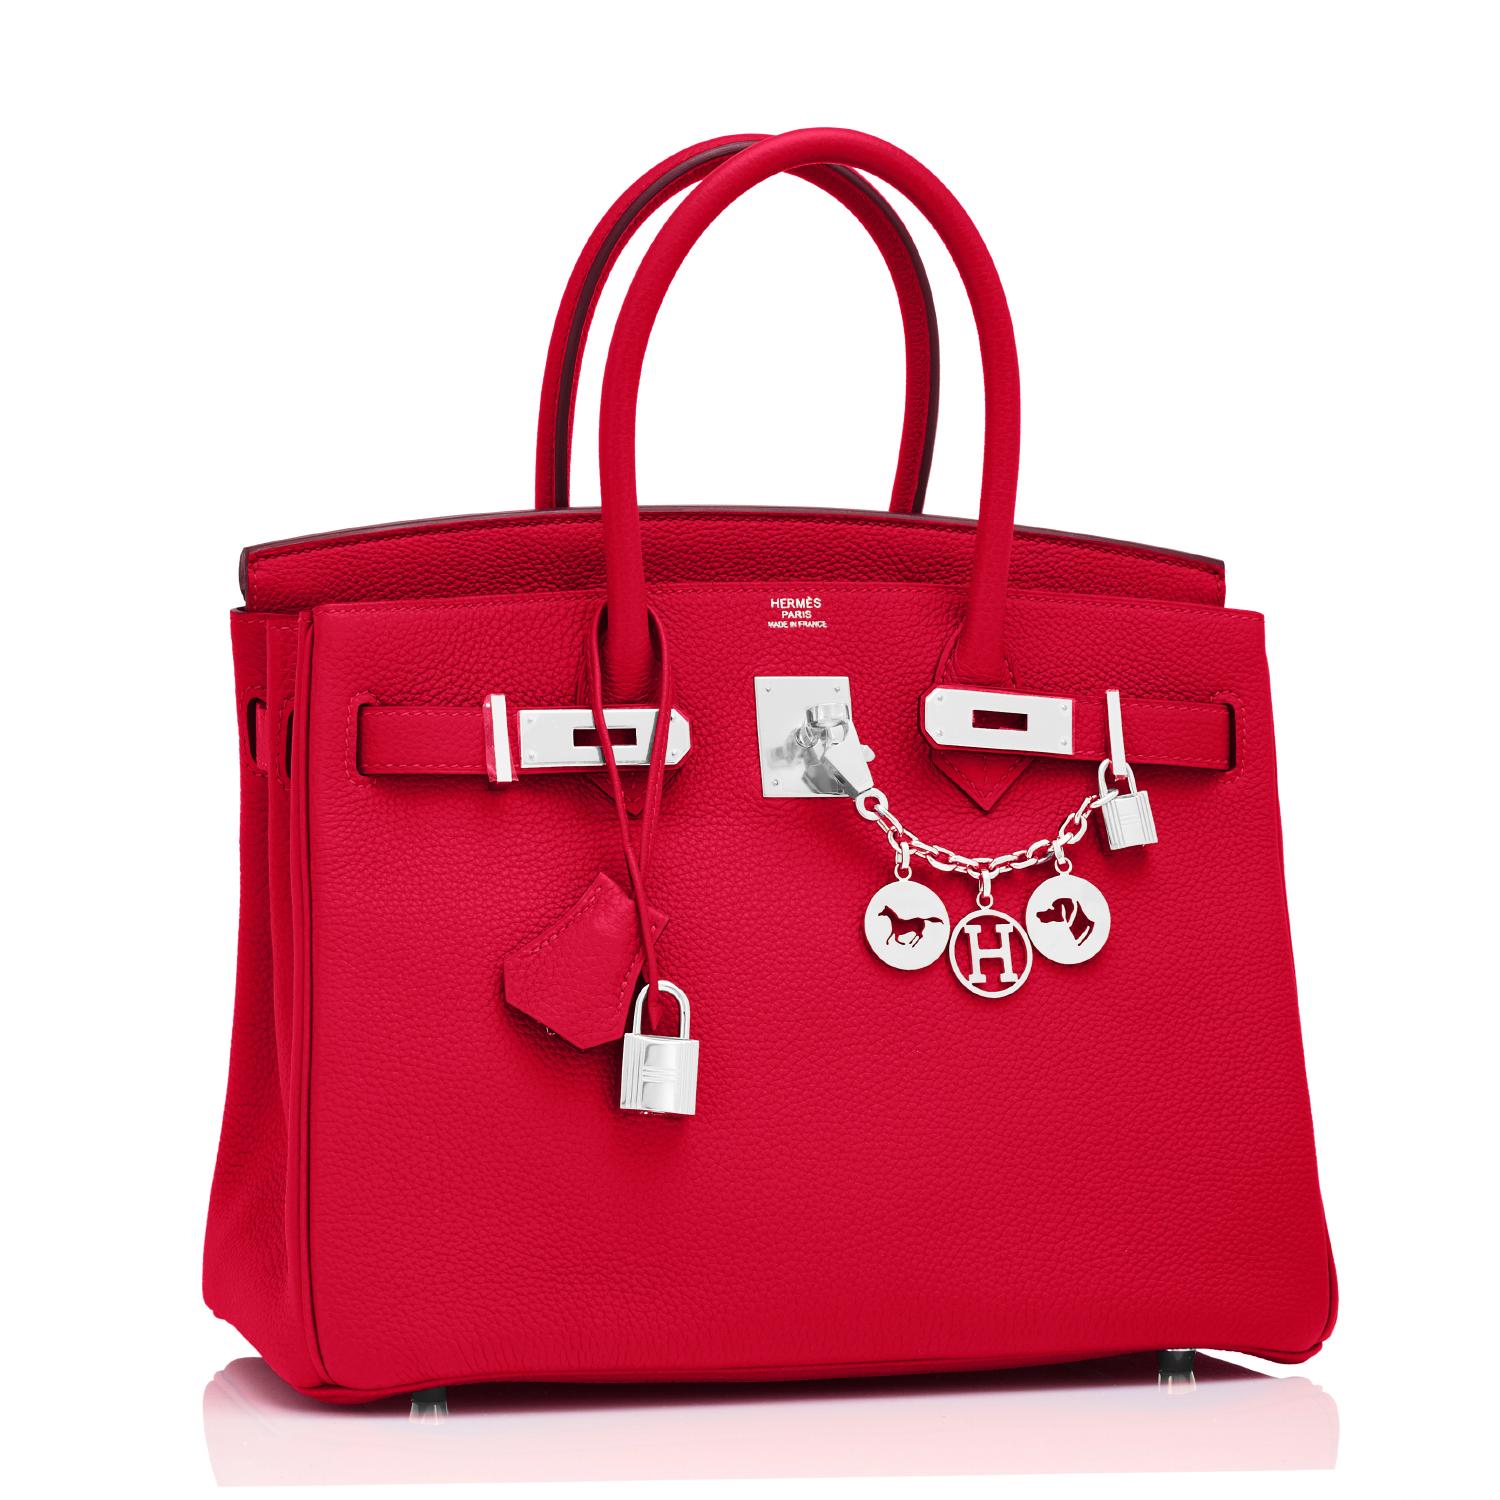 Hermes Rouge Casaque 30cm Birkin Lipstick Red Togo Gold Hardware Y Stamp, 2020
Don't miss this most rare and coveted red from Hermes in the most desired Togo! 
Just purchased from Hermes store! Bag bears new interior 2020 Y Stamp.
Brand New in Box.